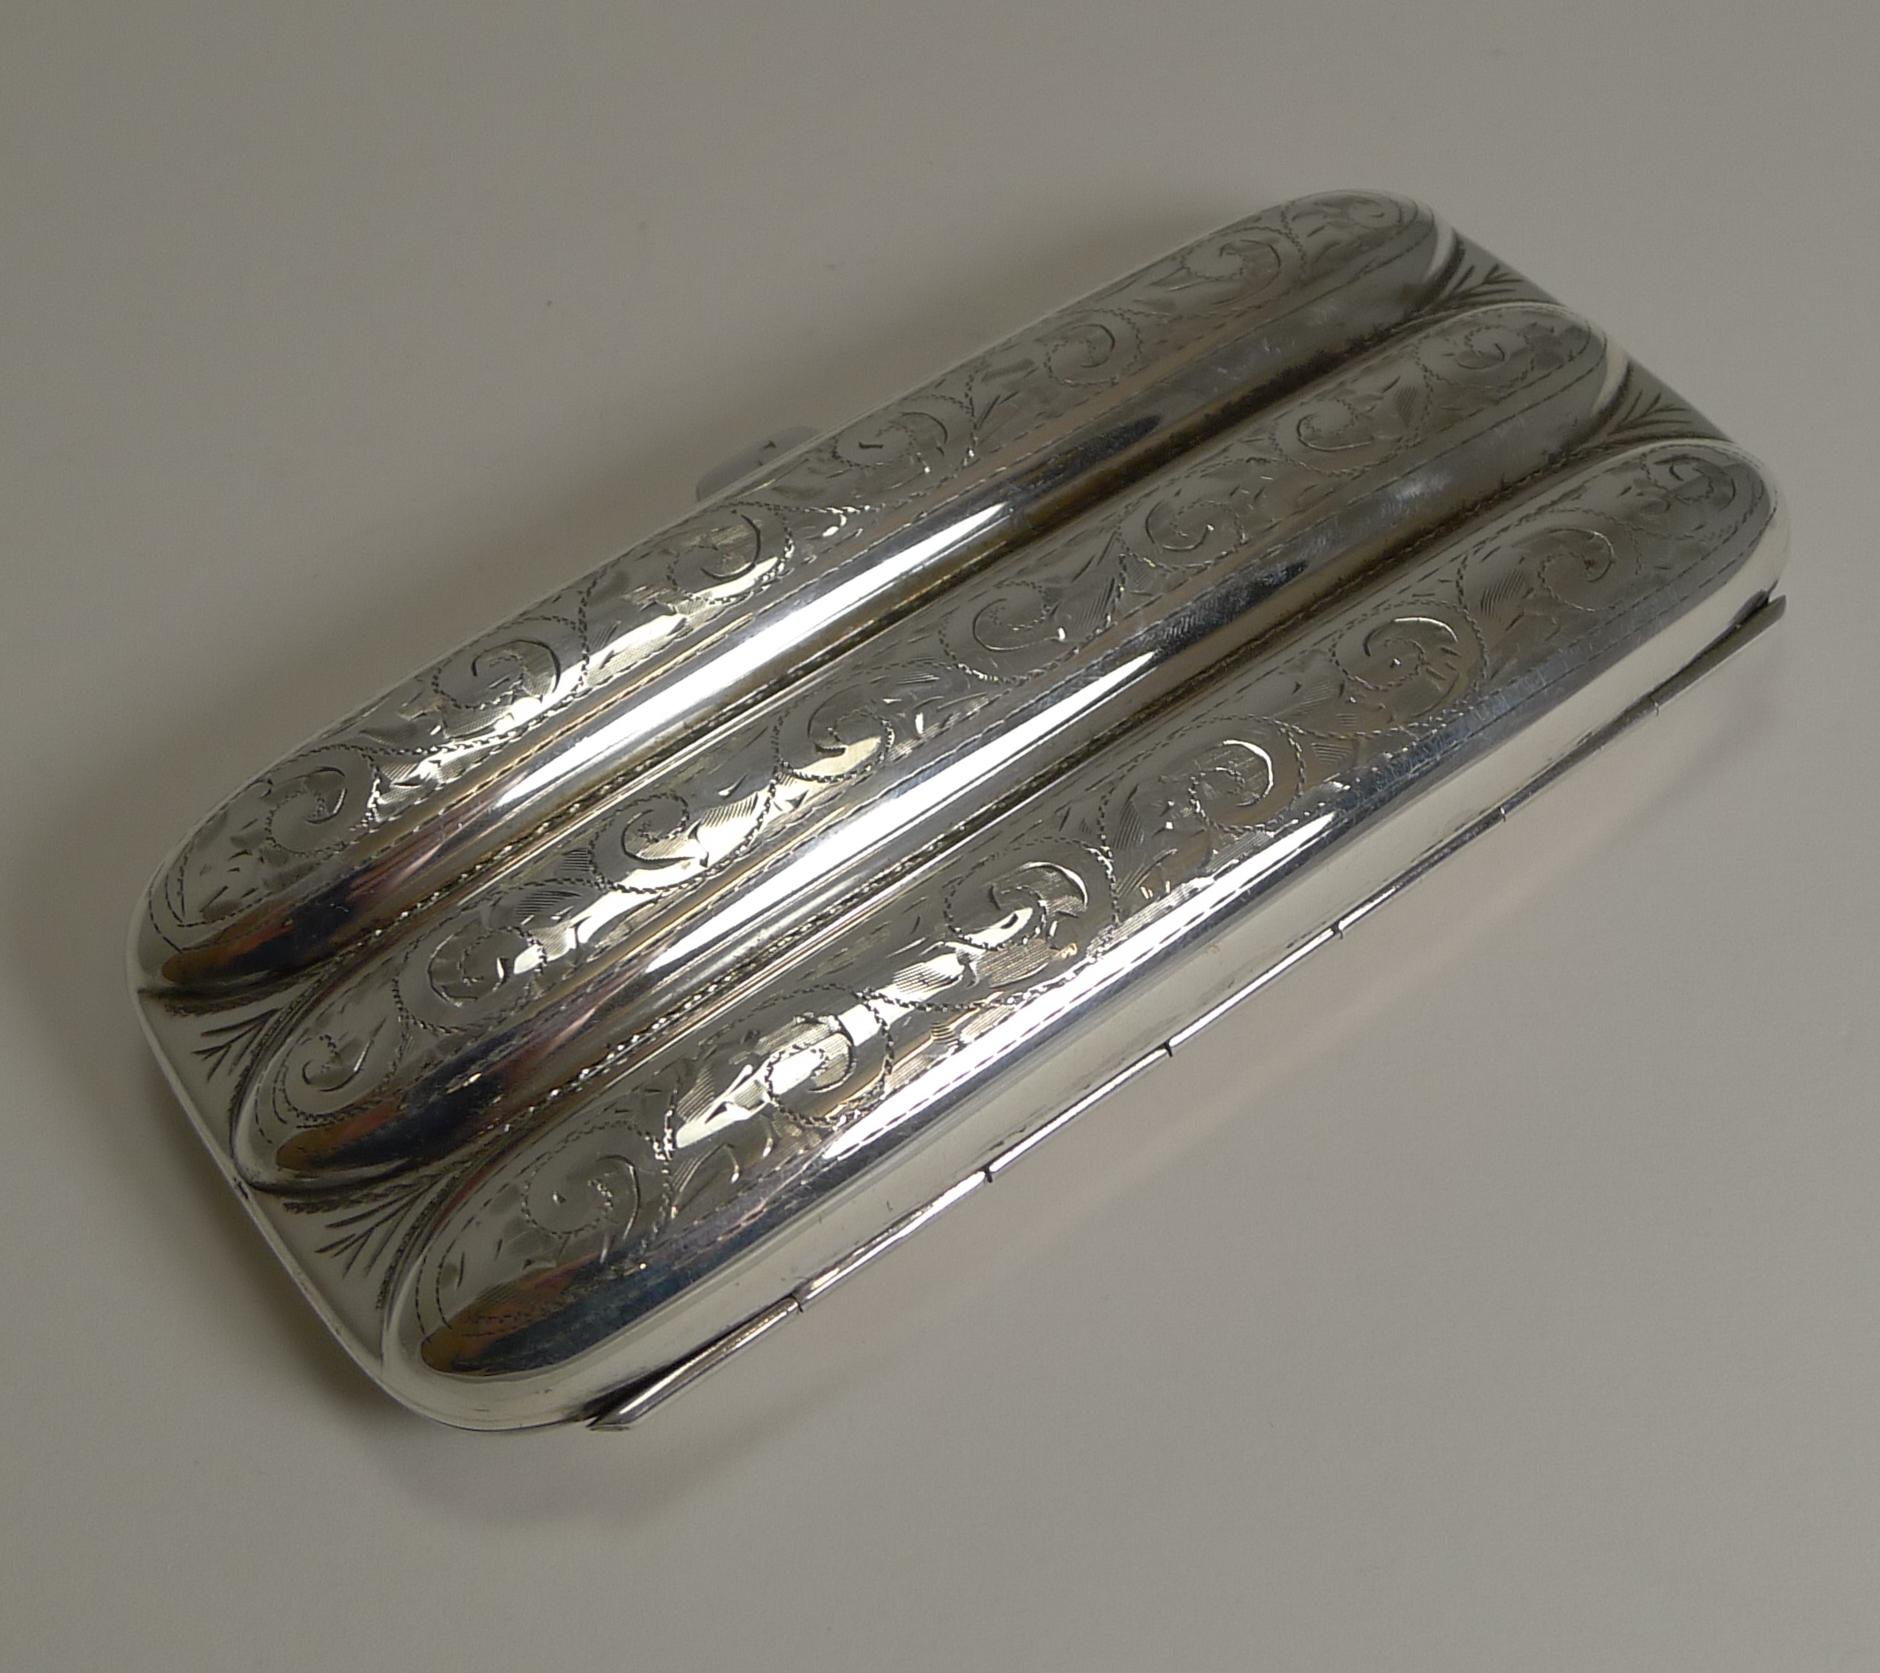 A very smart and lovely quality sterling silver cigar case, with a three-finger configuration beautifully engraved with the front of the central finger with a diagonal vacant cartouche.

The hinged case is opened with a press catch to the side and